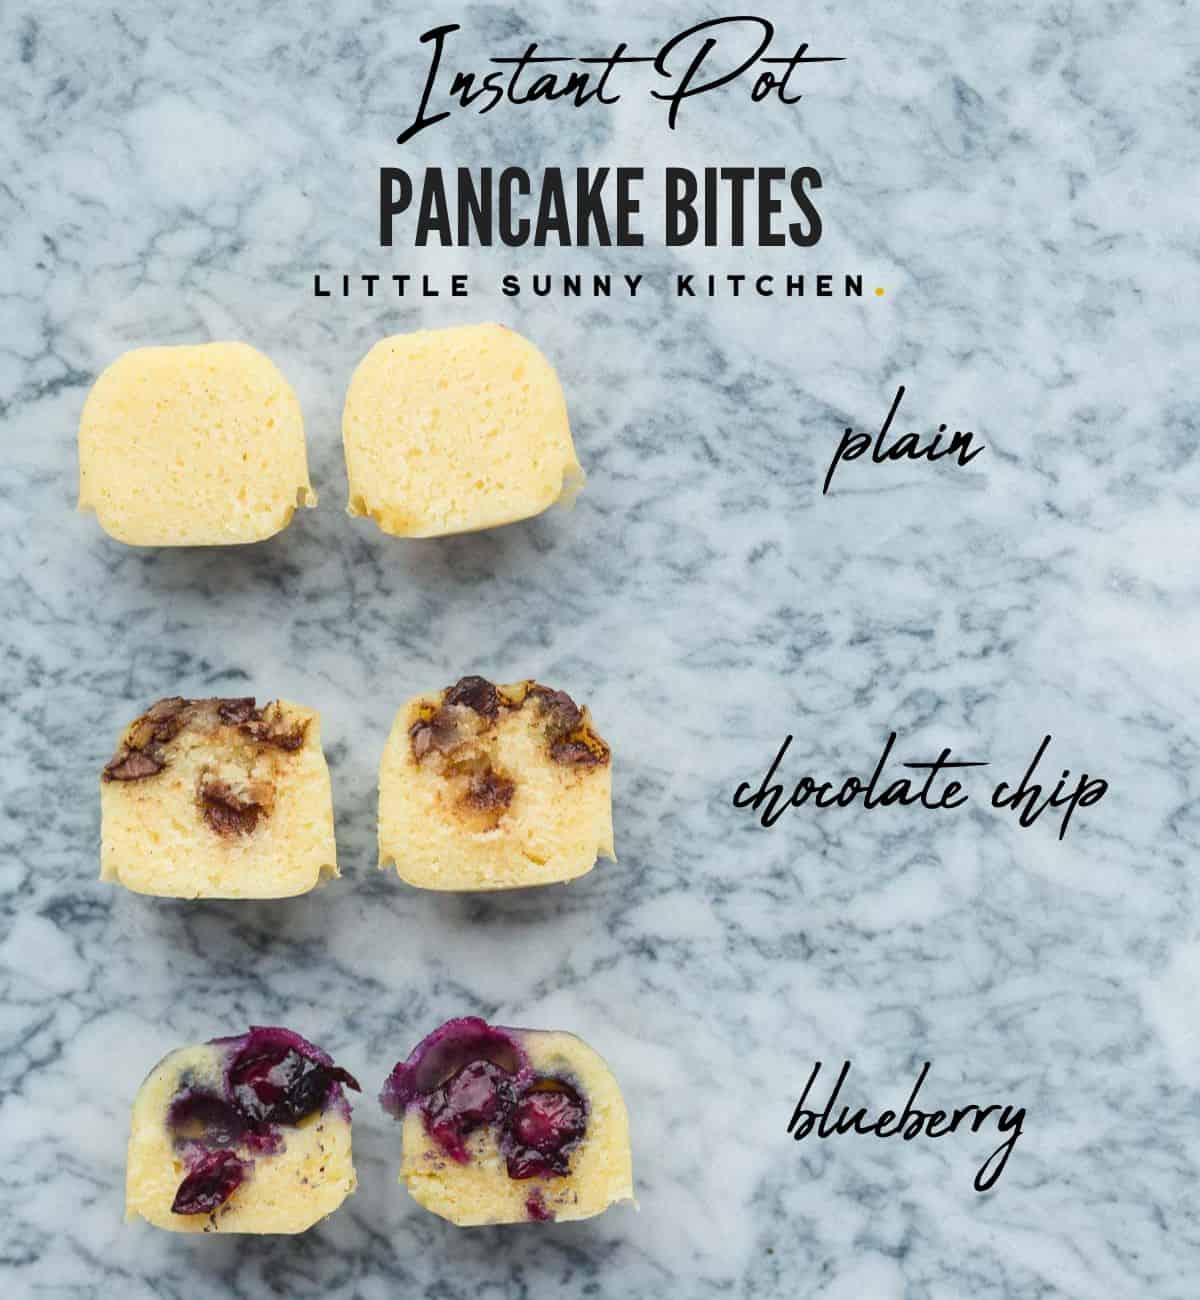 Example pancake bites flavor variations (plain, chocolate chip, and blueberry).